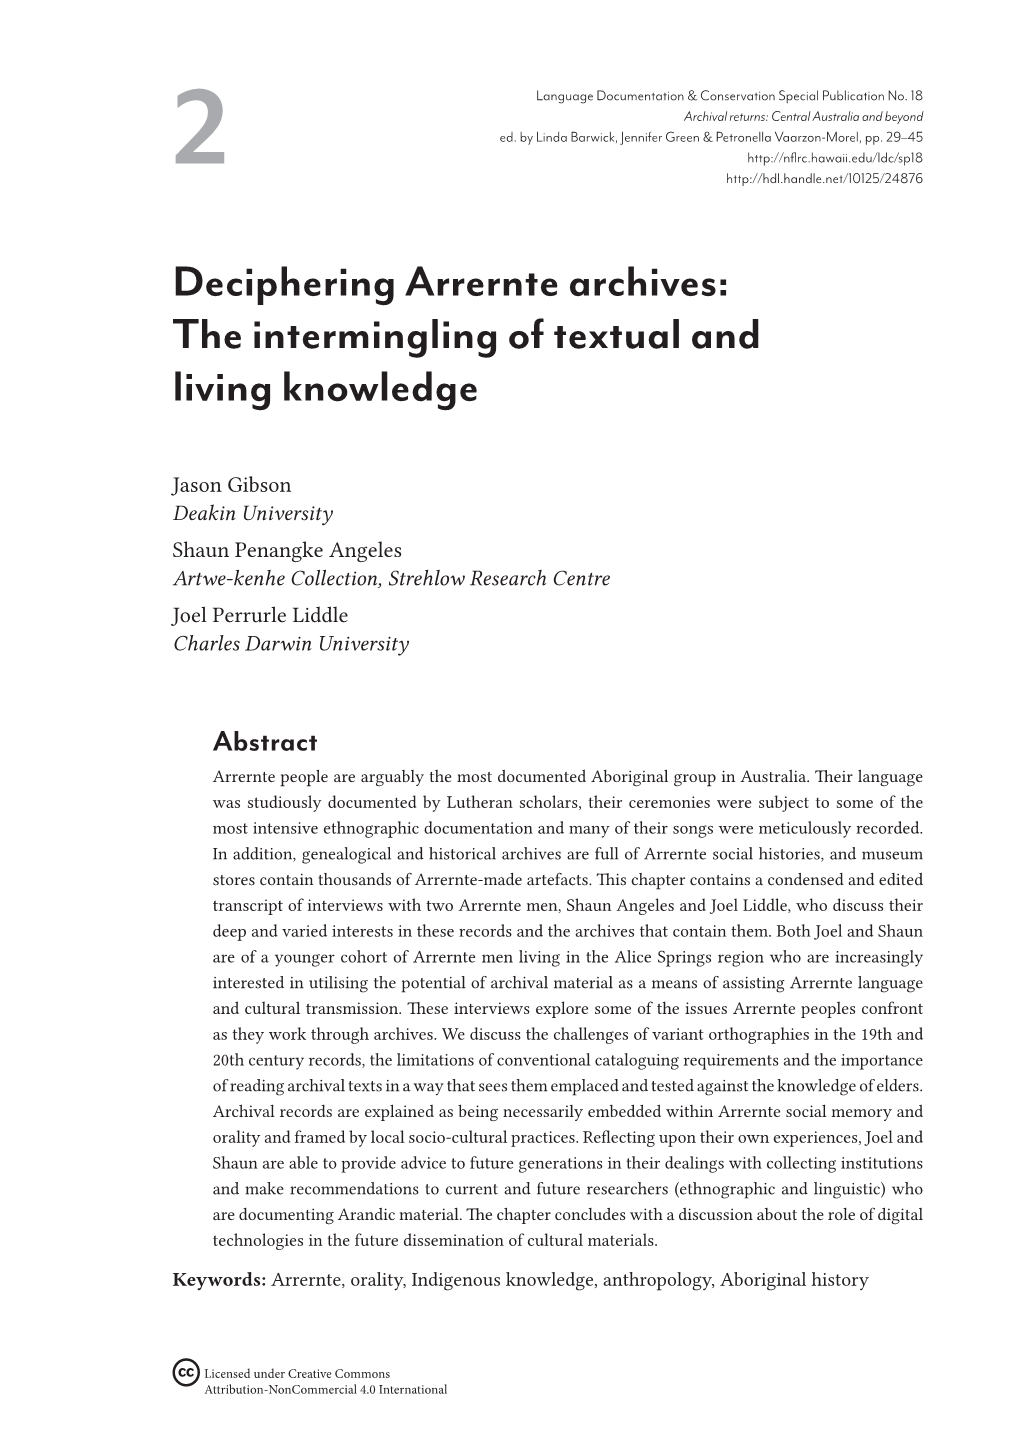 Deciphering Arrernte Archives: the Intermingling of Textual and Living Knowledge